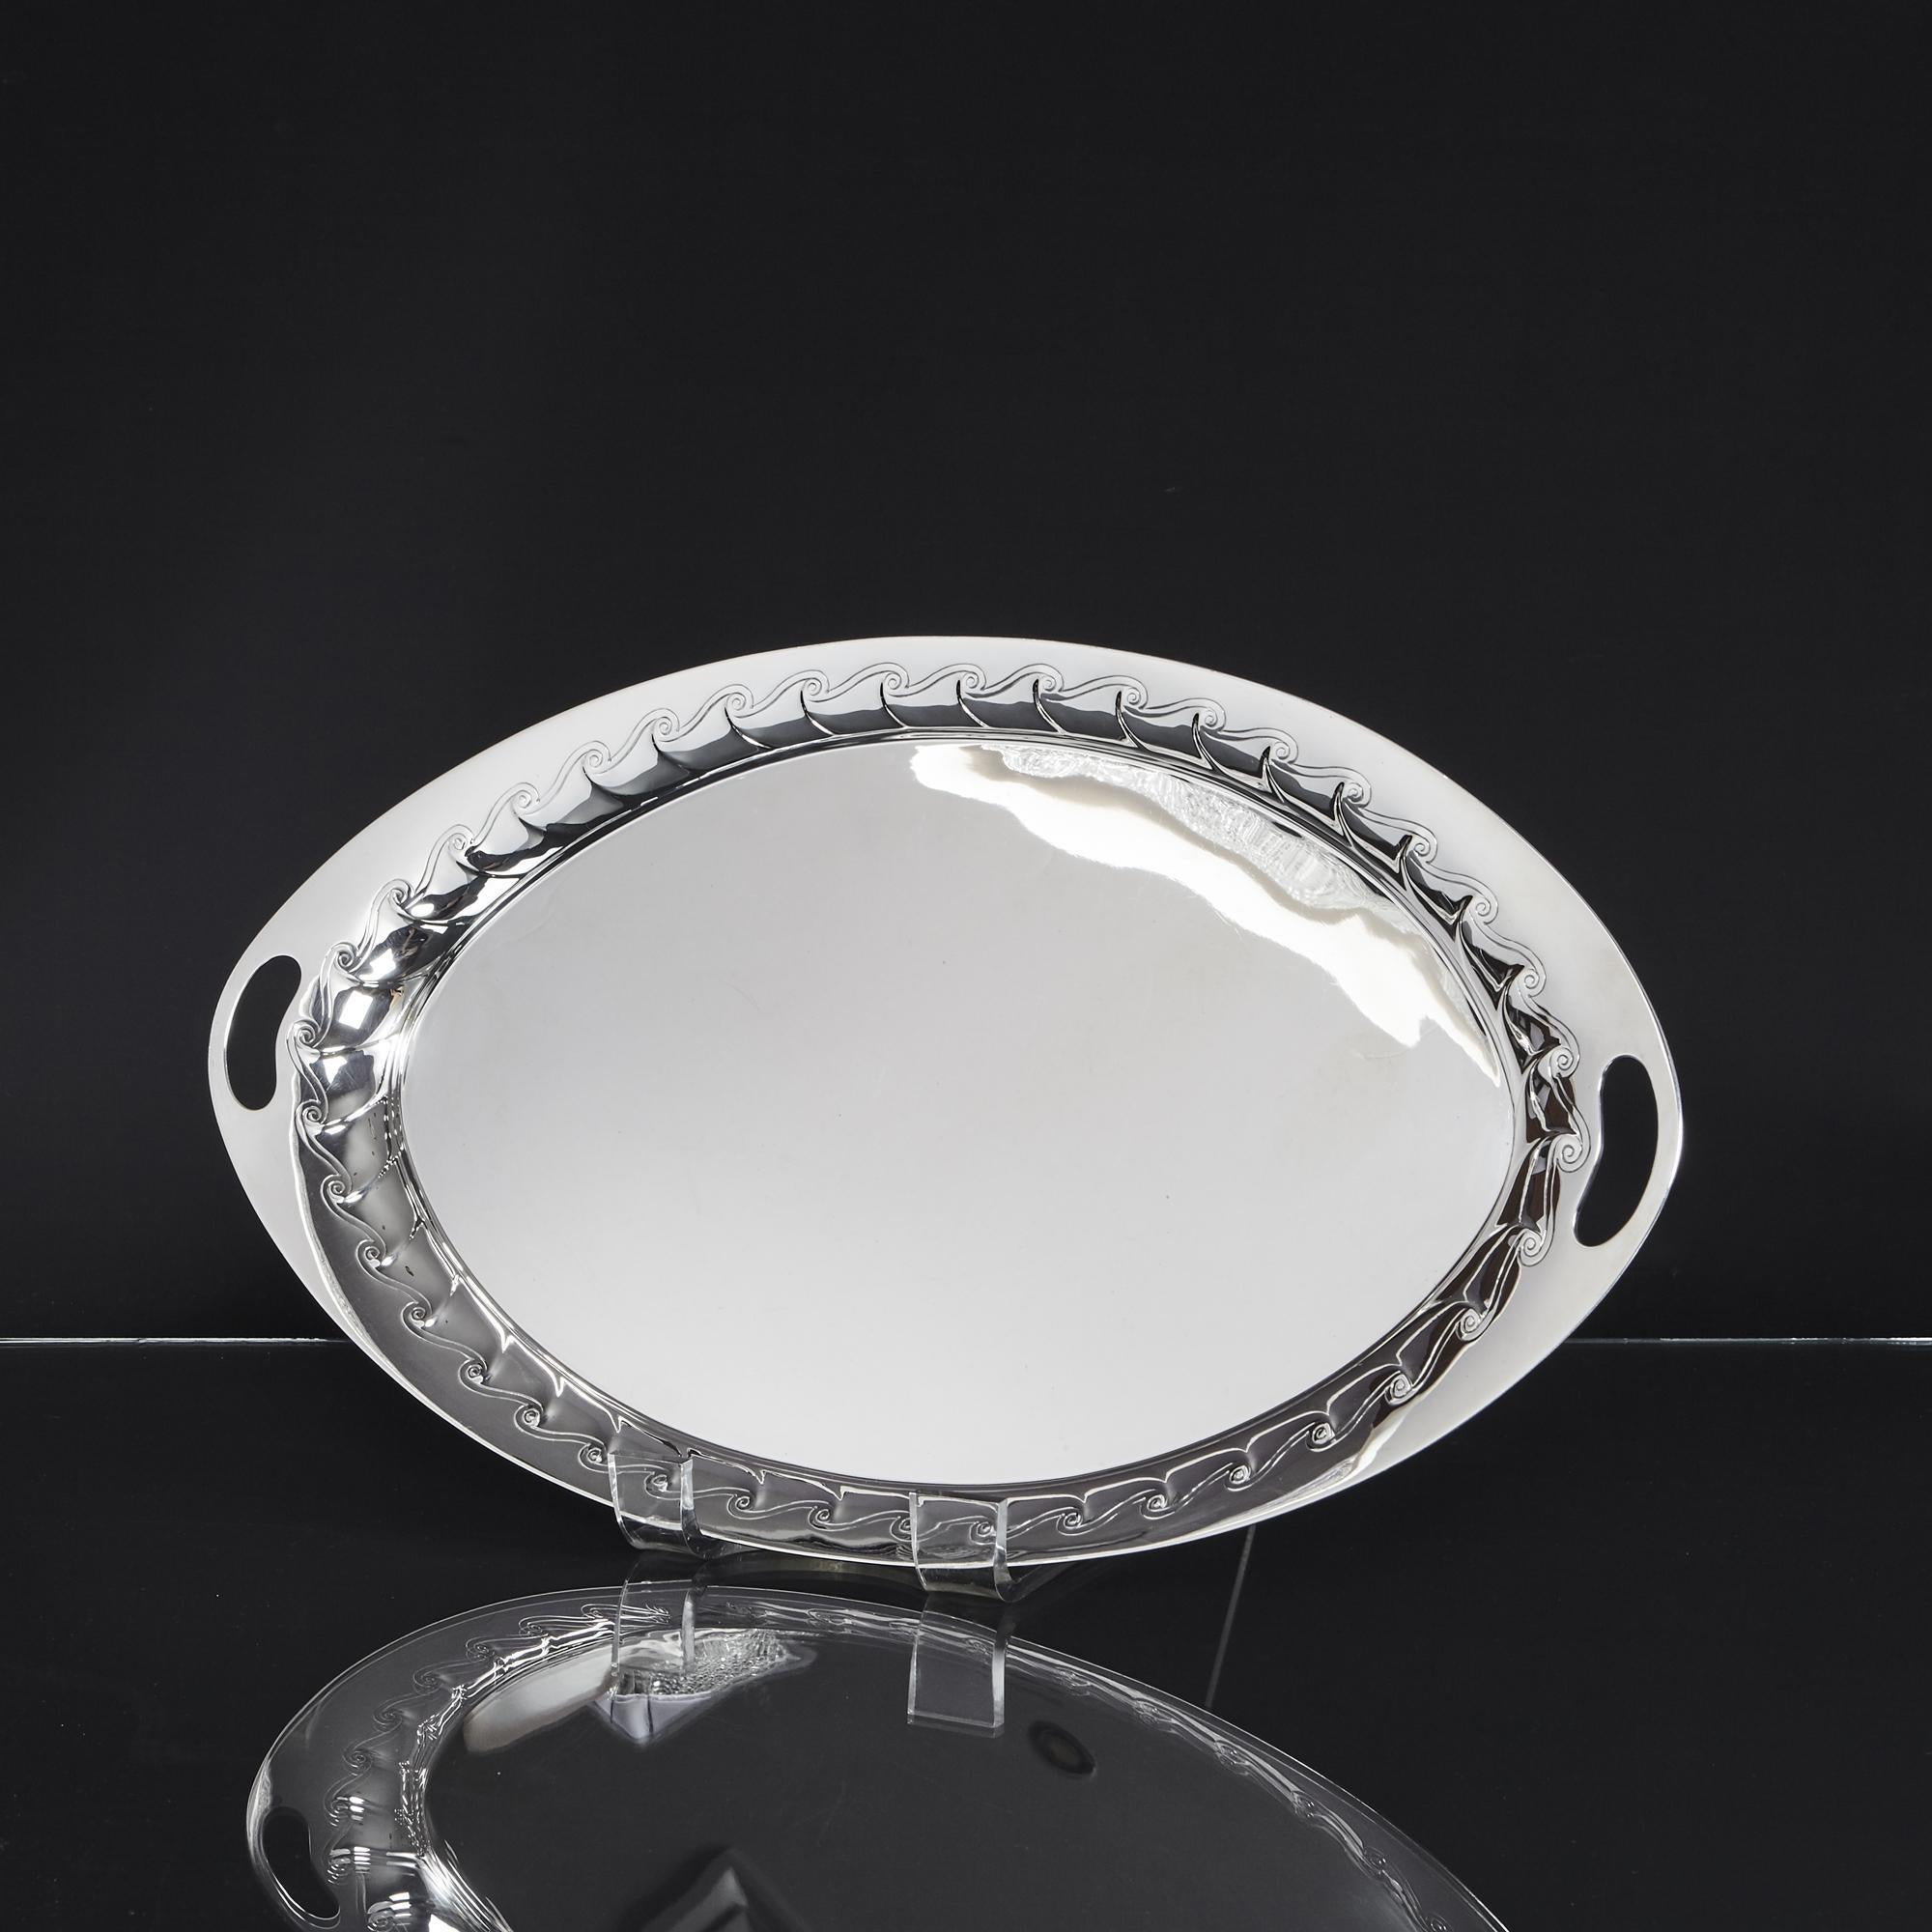 Graceful oval tray in sterling silver with a flared rim that is embossed and engraved with slanted fluting and wave-like scrolls. It has two handles incorporated into the rim.
This tray would be ideal for serving drinks or to take a three piece tea